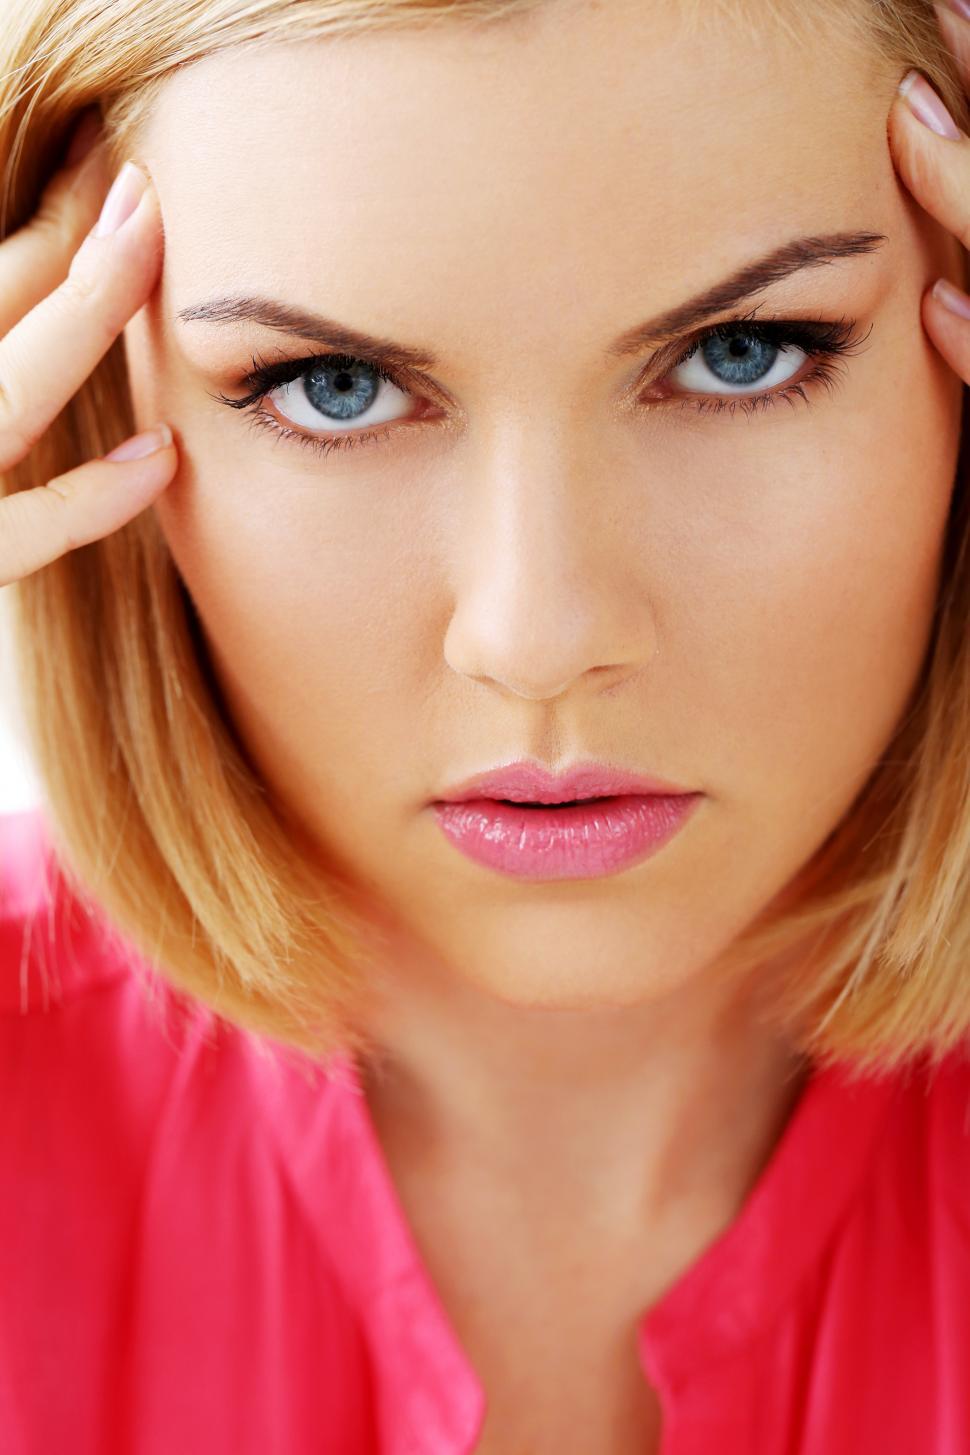 Free Image of Woman with blue eyes close up, looking stressed 